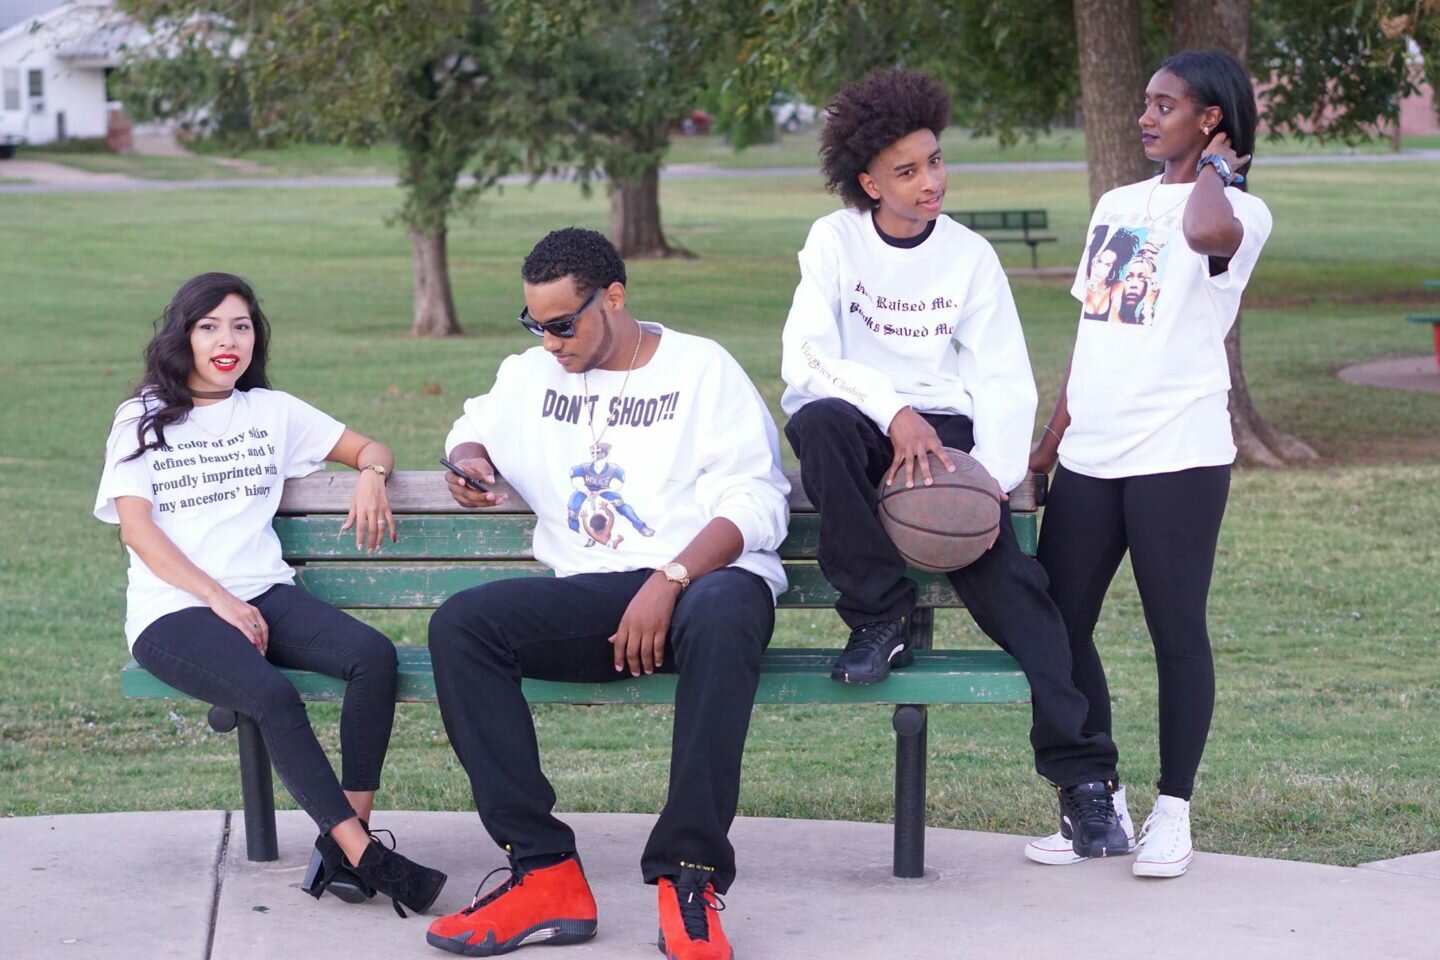 6 Inspiring Black Owned T-Shirt Companies to Shop on Small Business Saturday